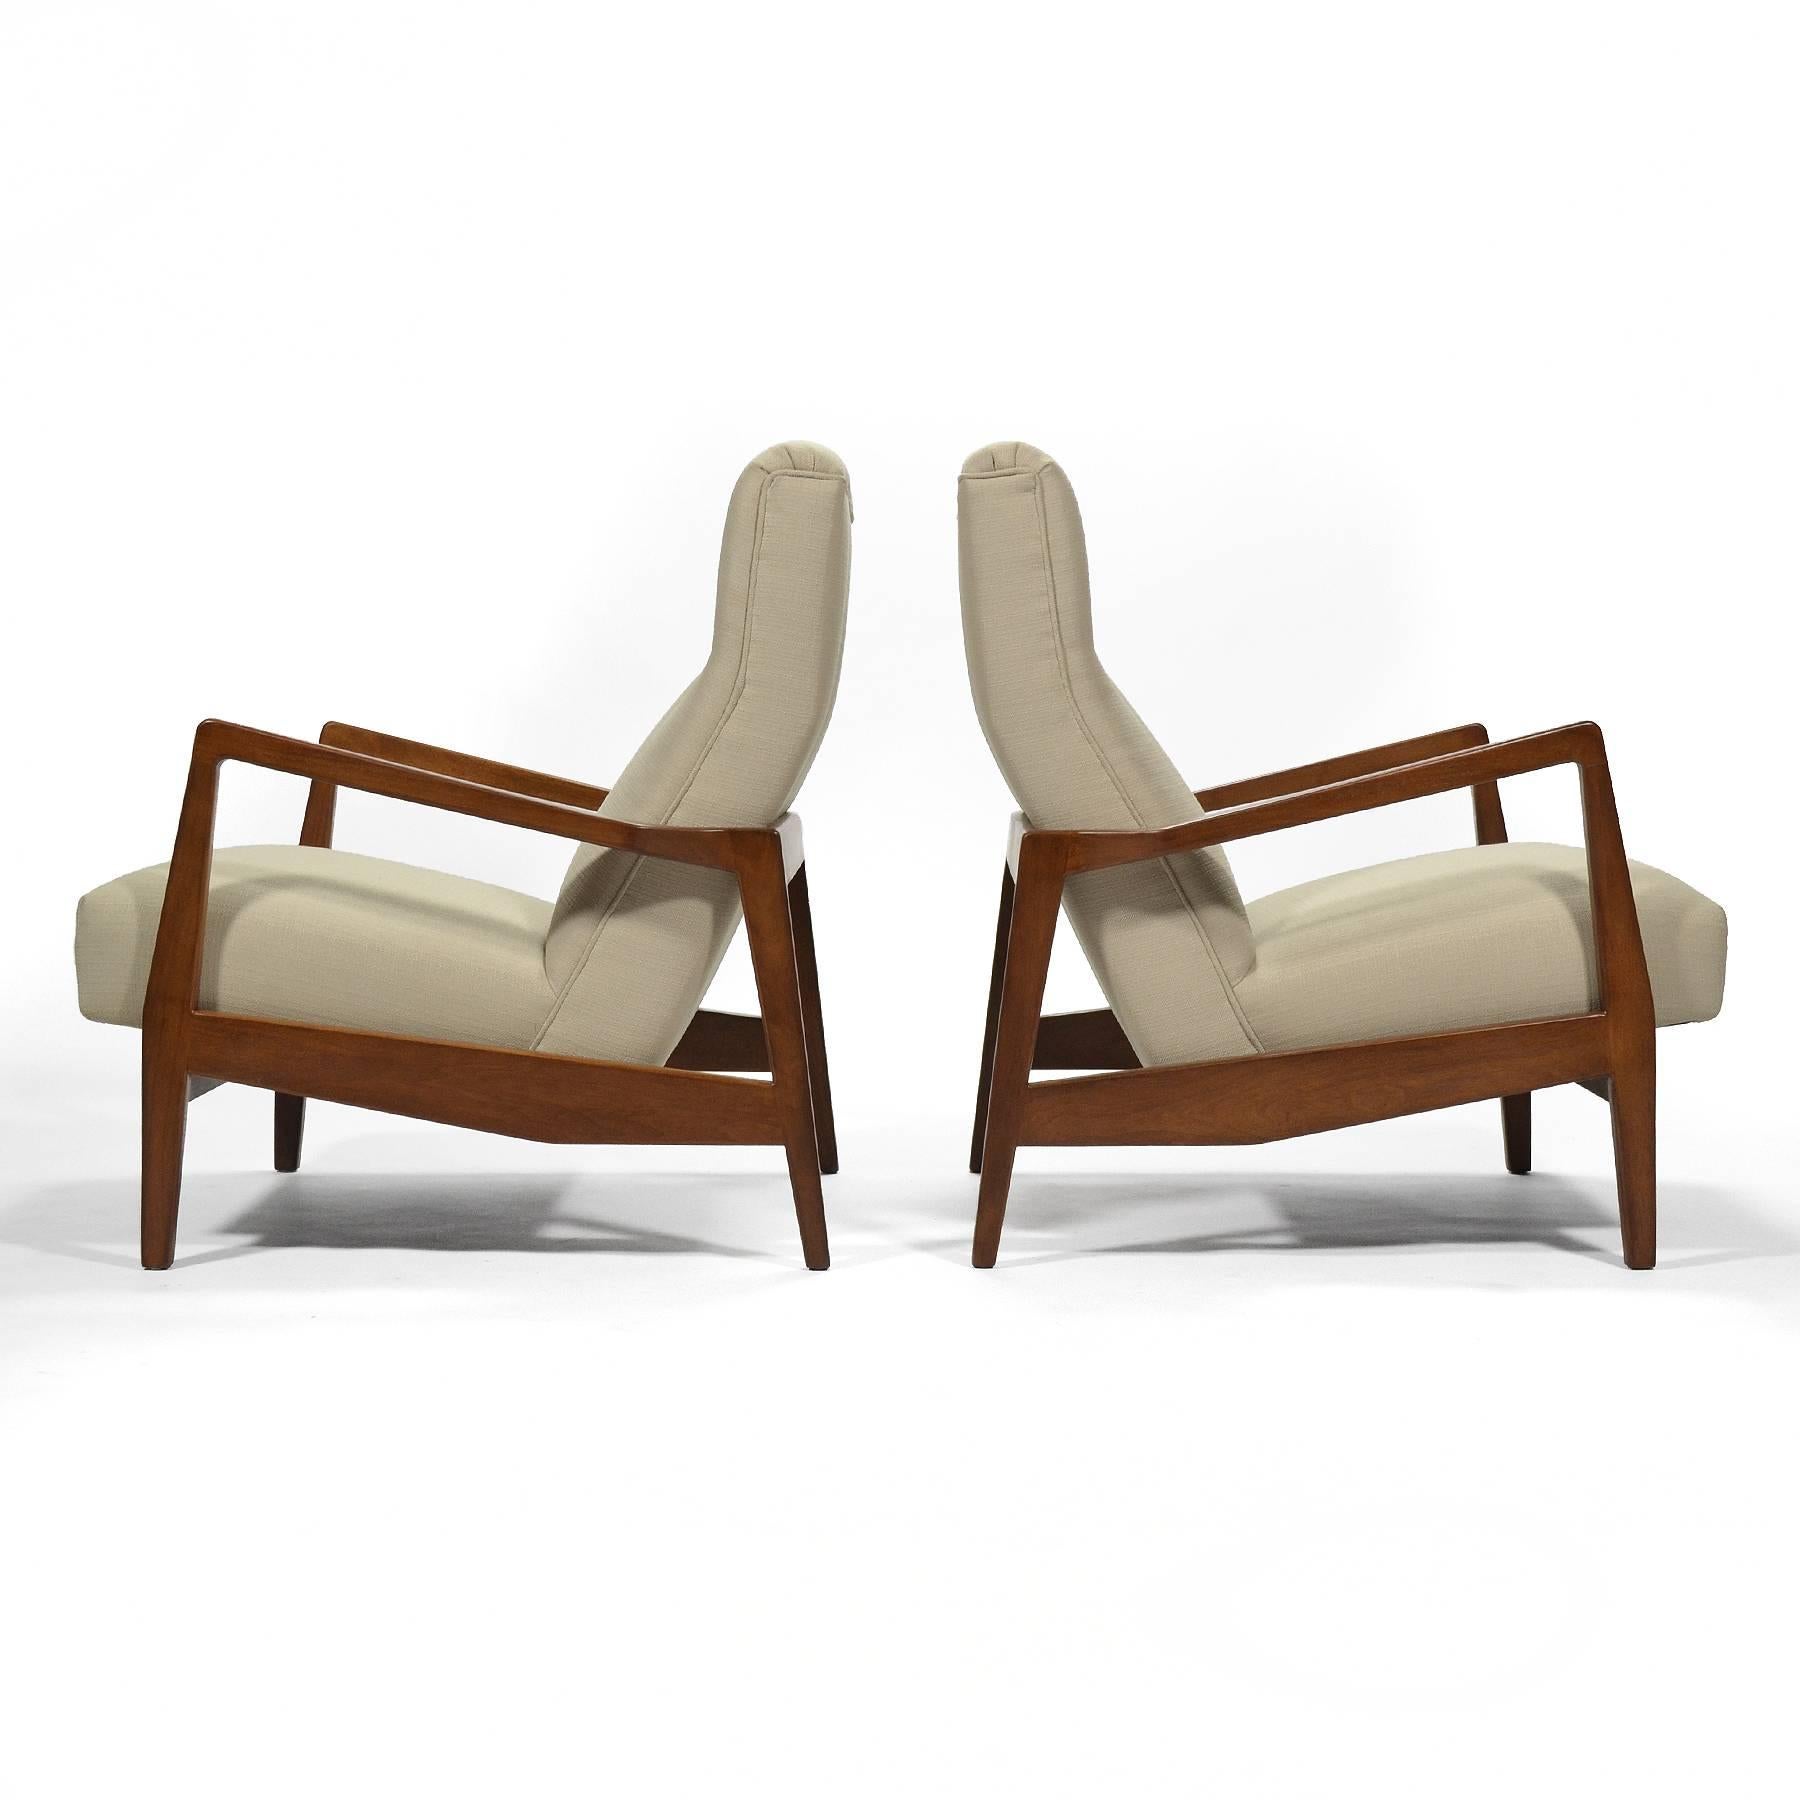 Risom's Danish heritage is on full display with this design. The pair of model U 453 lounge chairs are as comfortable as they are beautiful. They feature sculptural frames which support the high back seats and have just been fully restored and